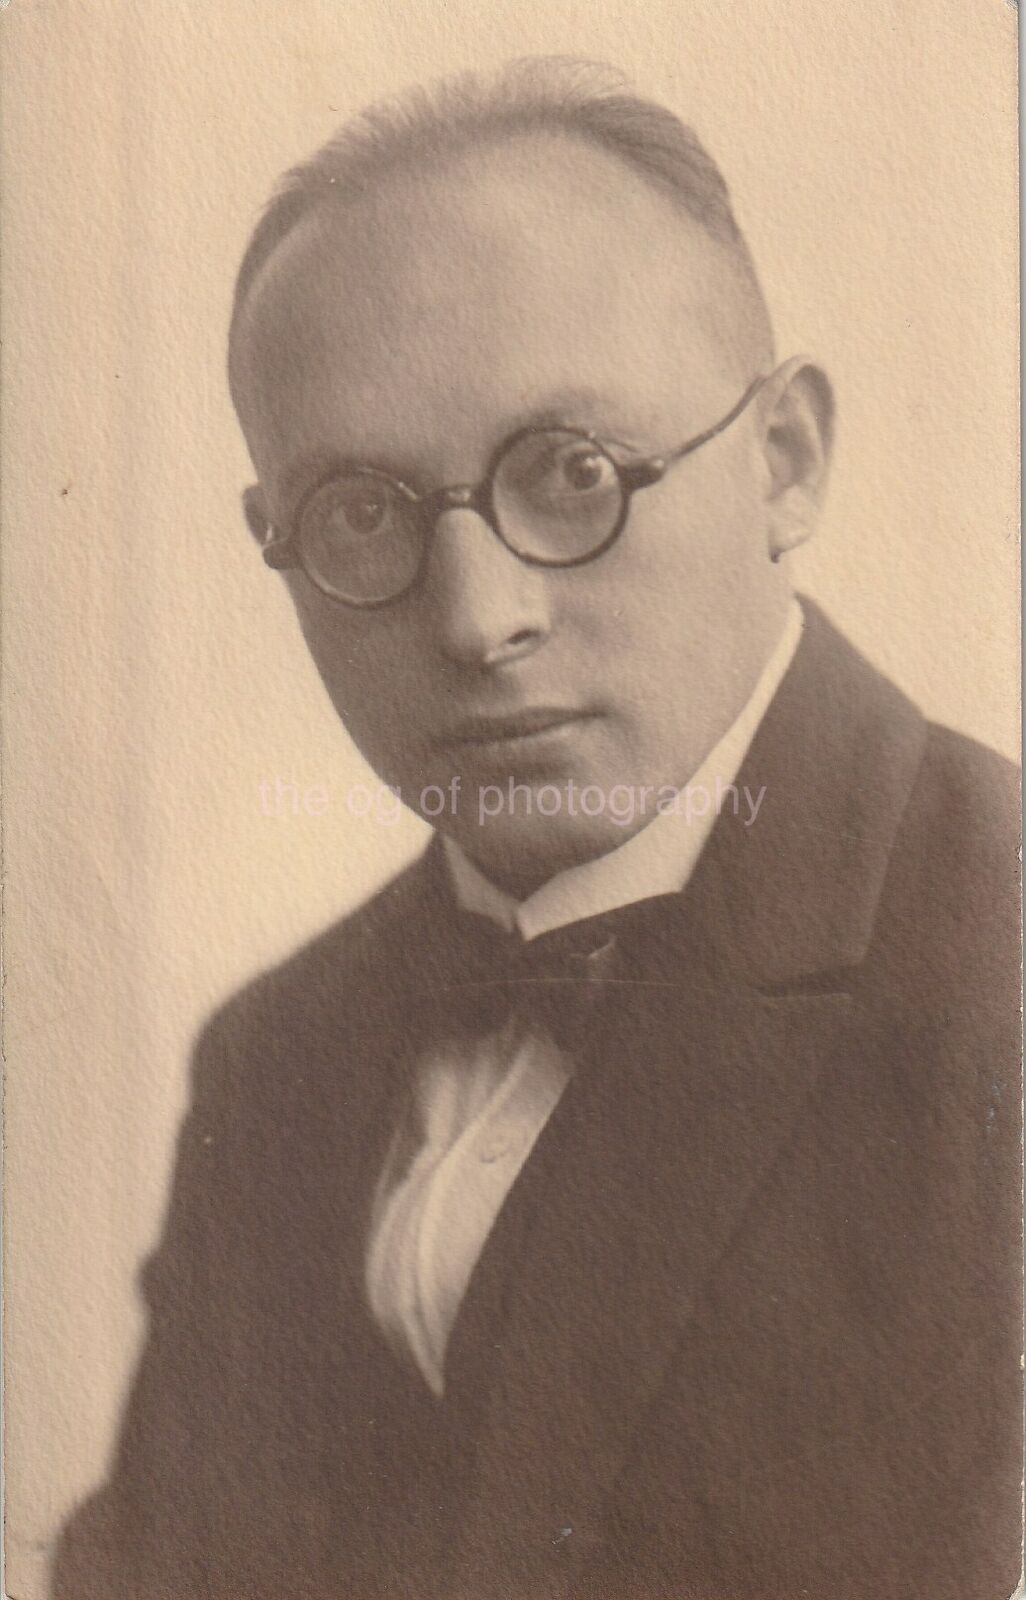 MAN FROM BEFORE Vintage POSTCARD Found Real Photo RPPC b+w ORIGINAL 96 25 C